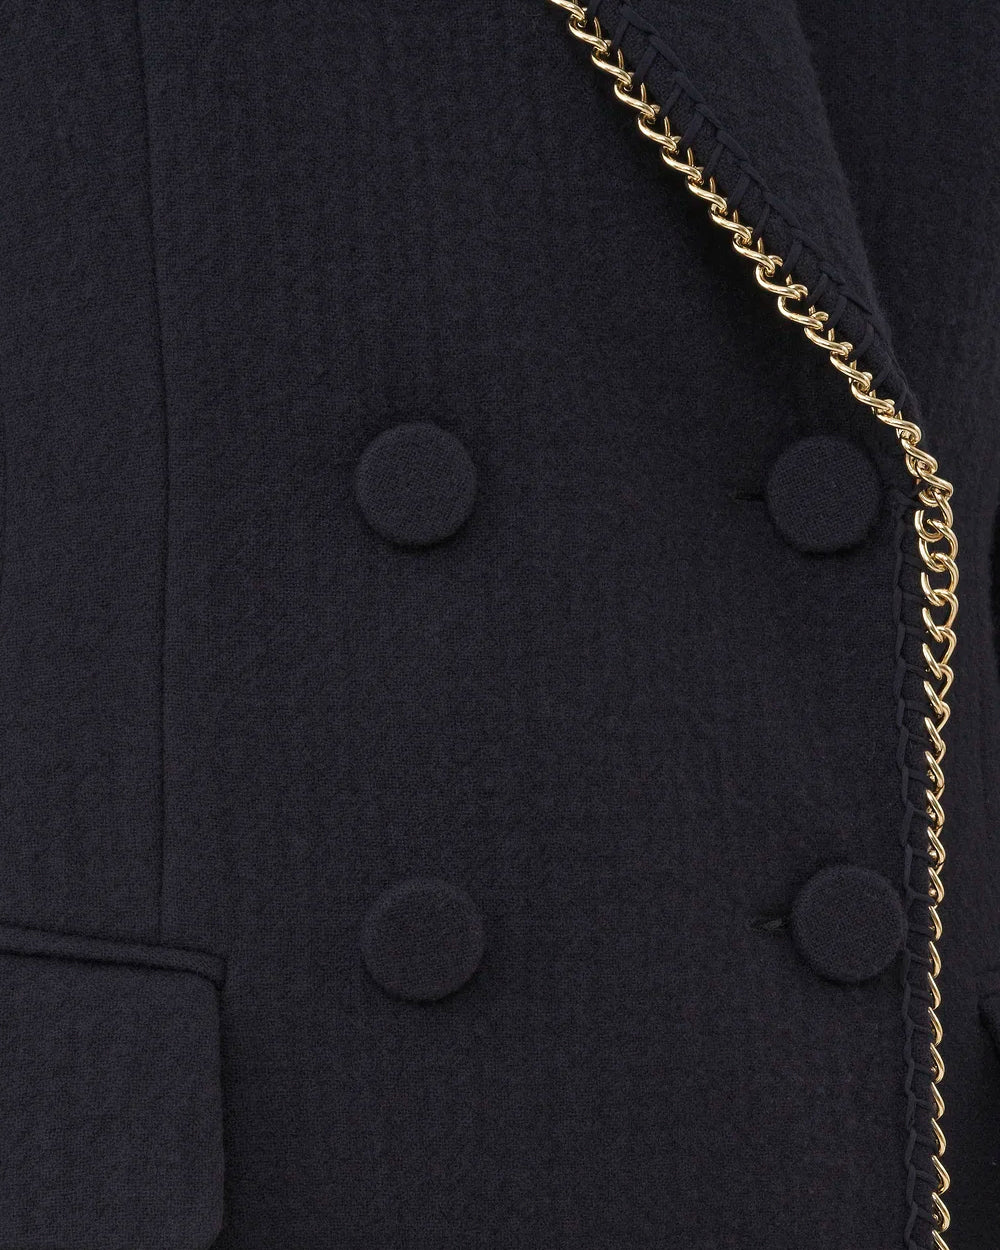 Navy Ink Chain Trim Double Breasted Blazer